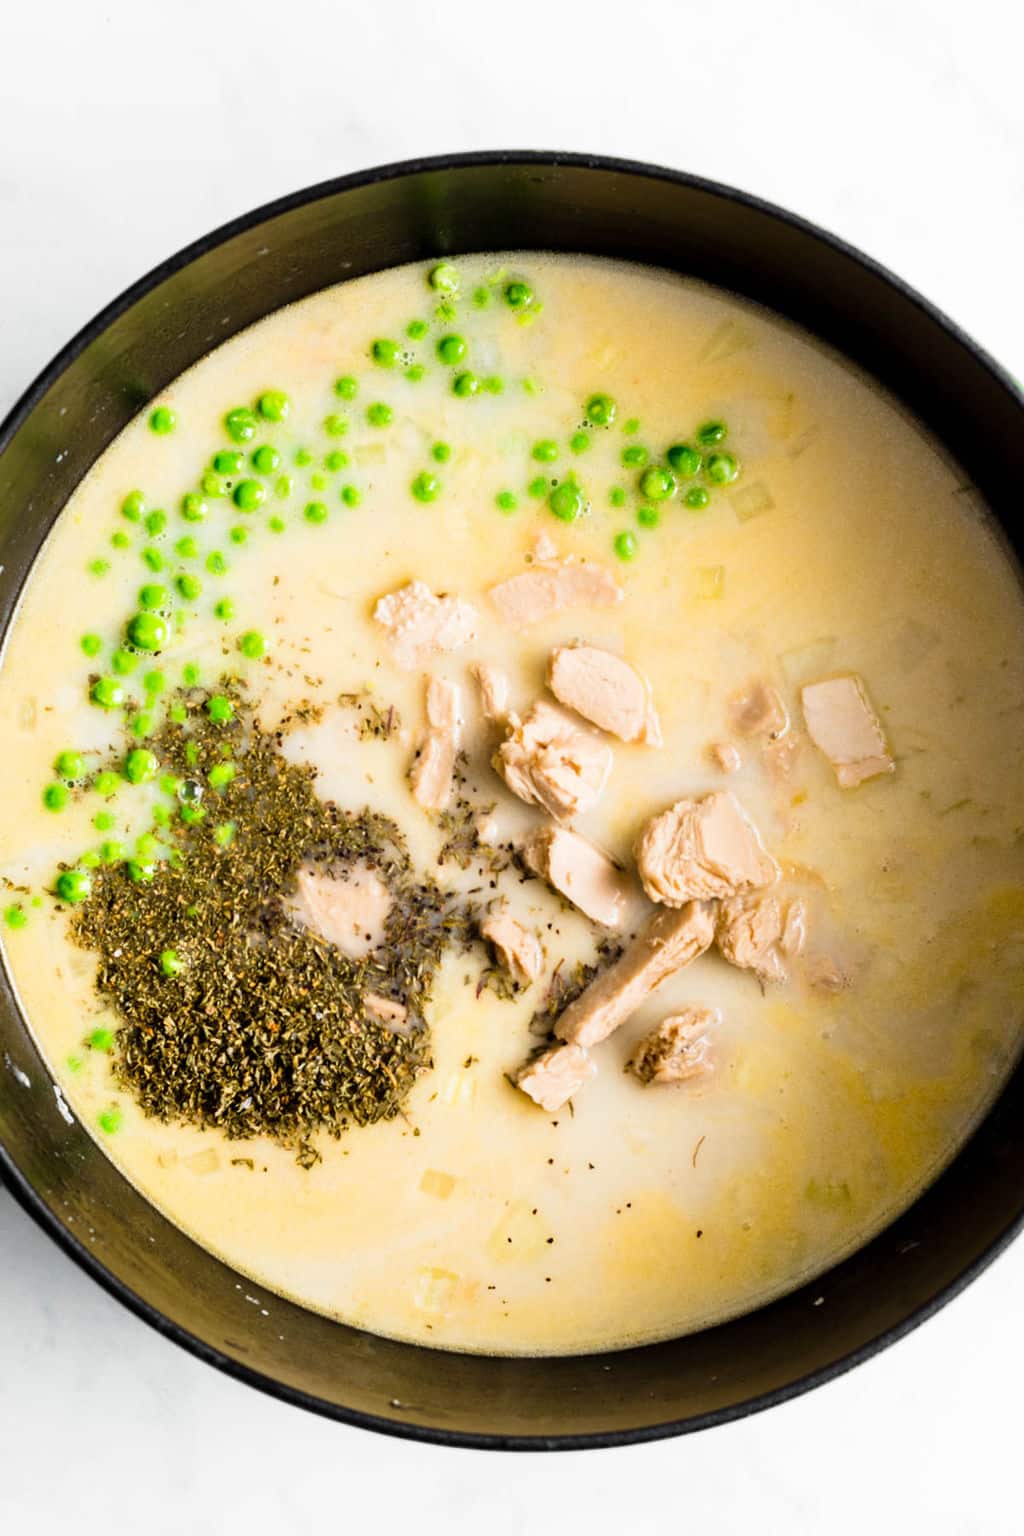 large black pot filled with a creamy liquid, vegan chicken, dried herbs, and green peas.